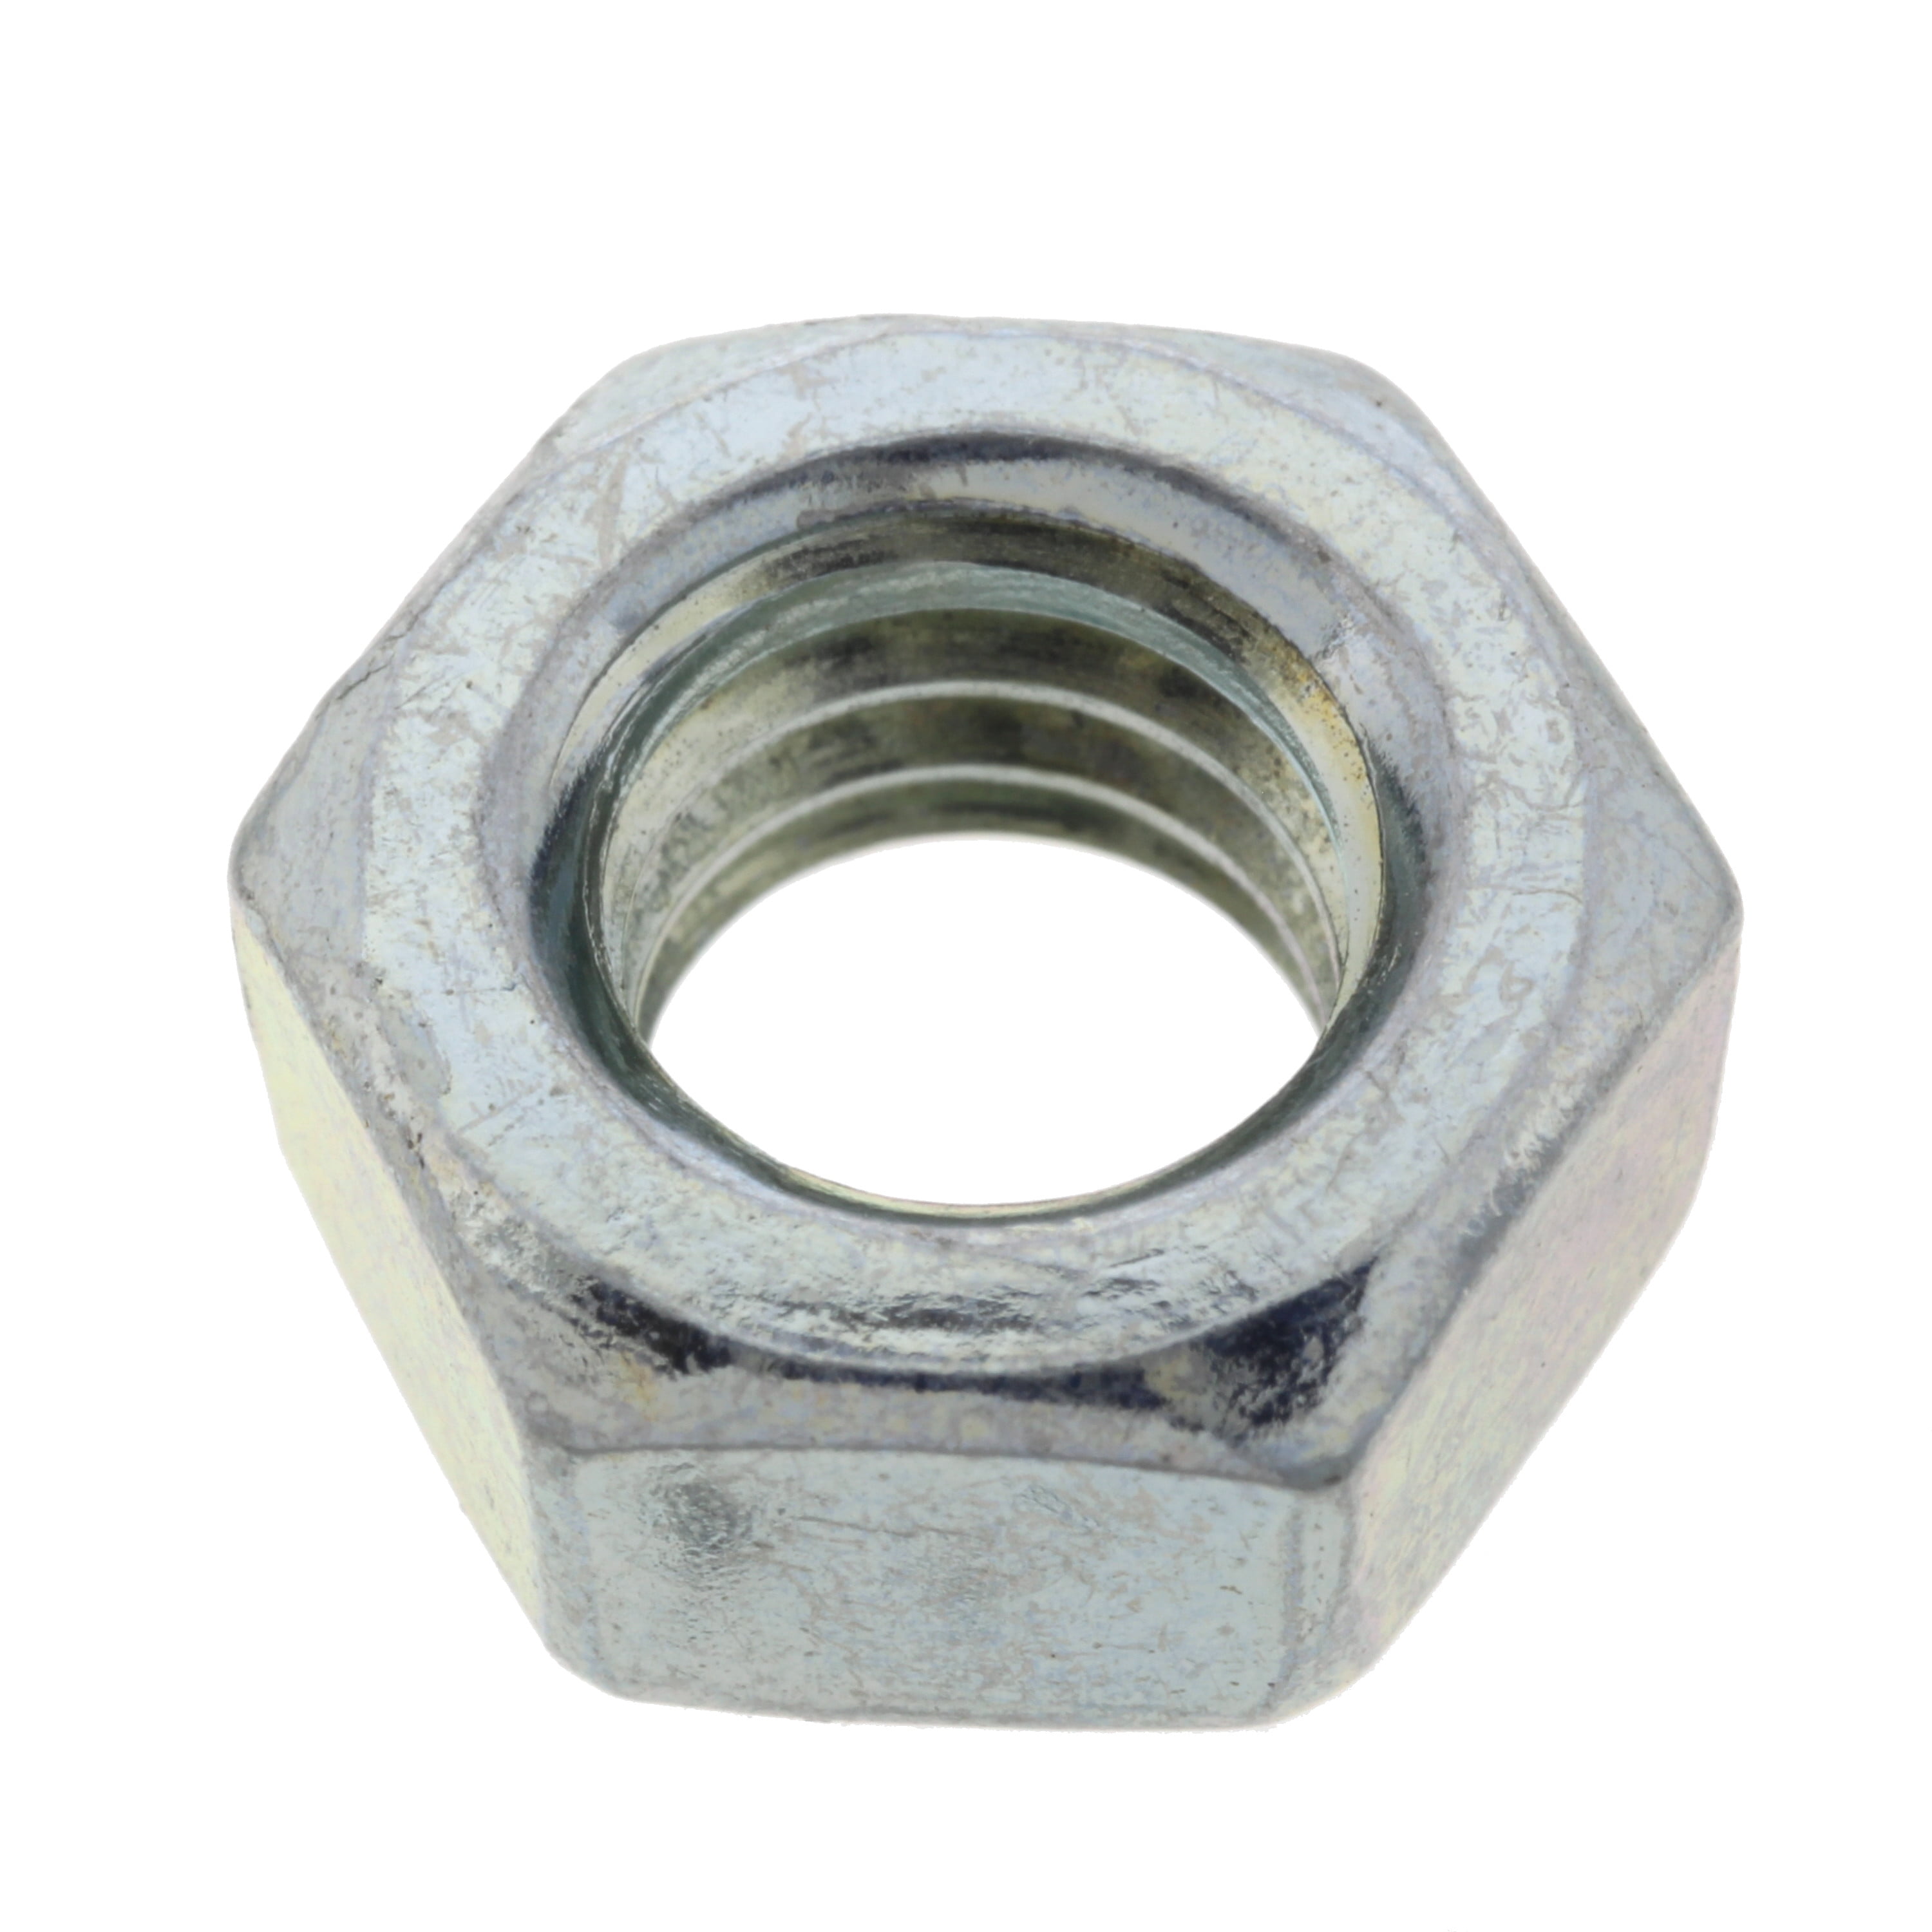 9/16"-18 Grade 5 Finished Hex Nuts Electro Zinc Plated Steel Qty 10 